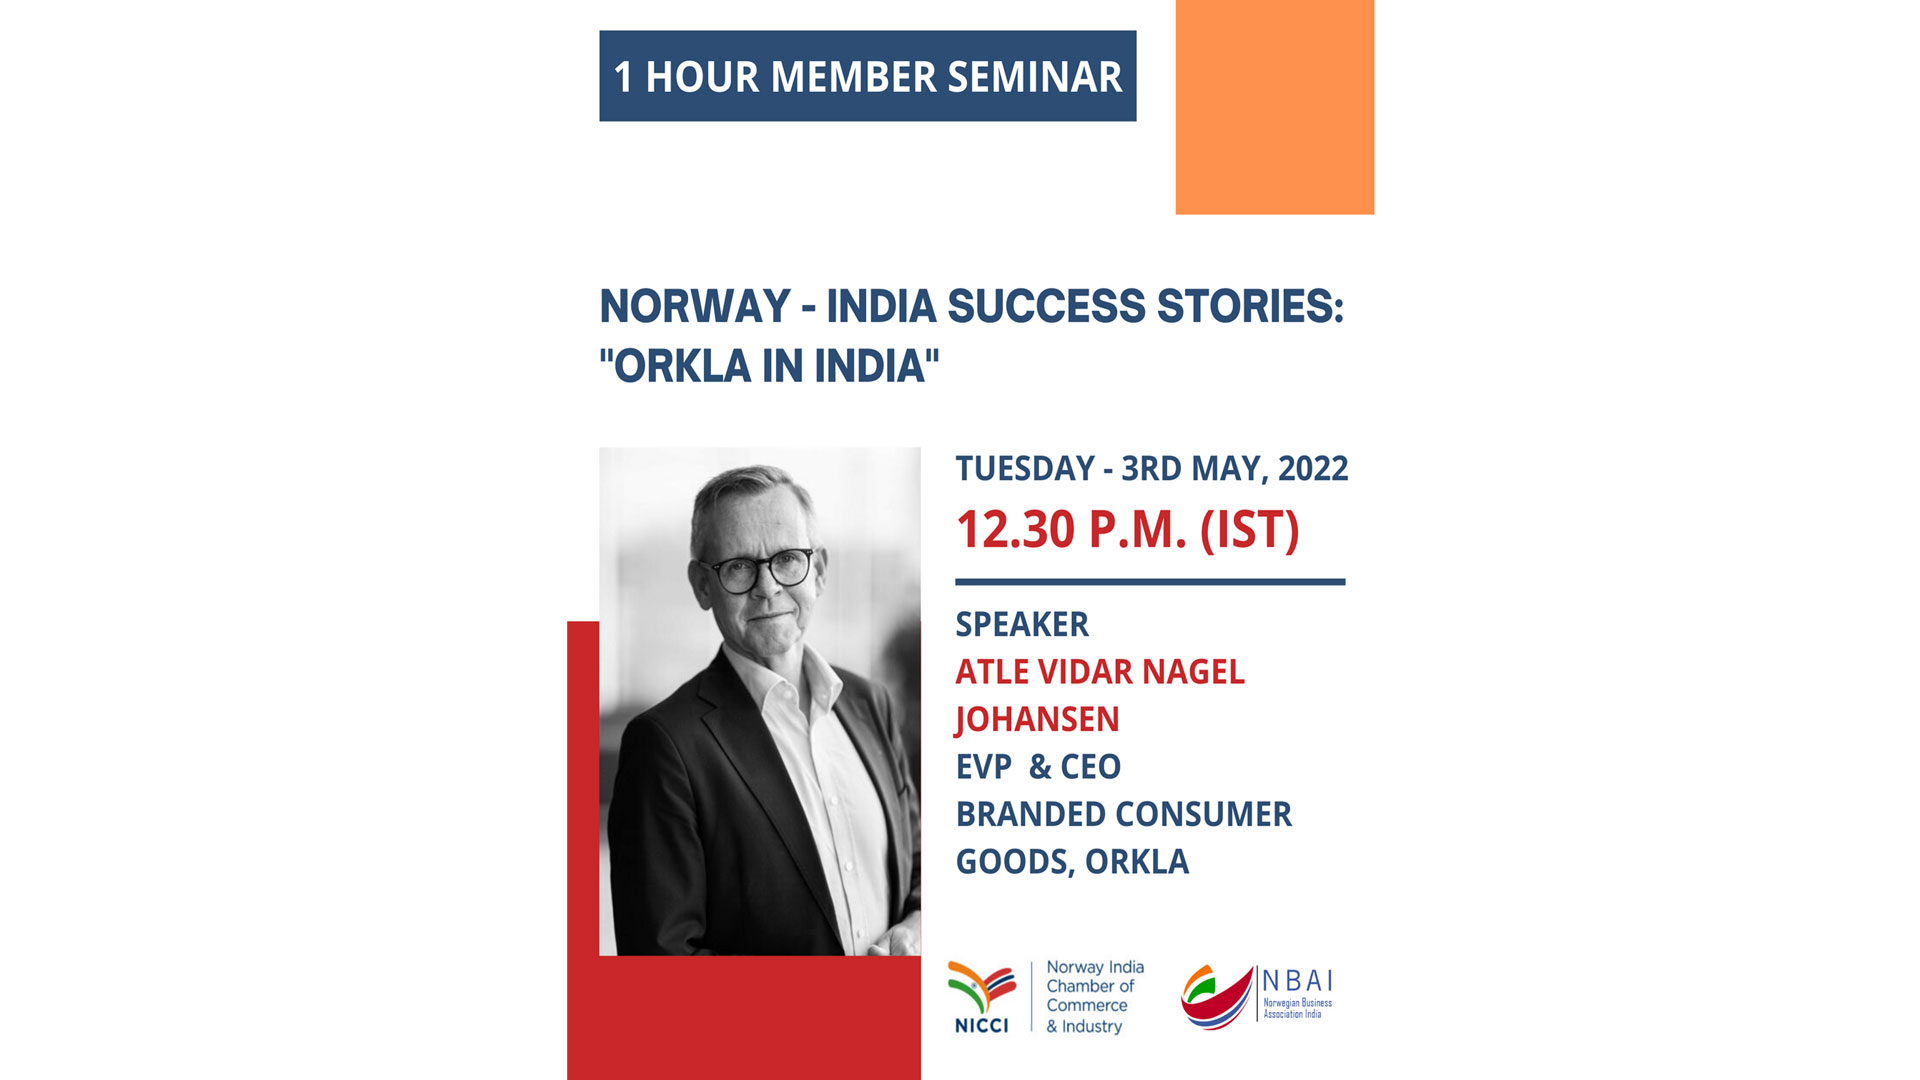 TITLE : NORWAY – INDIA SUCCESS STORIES: ORKLA IN INDIA